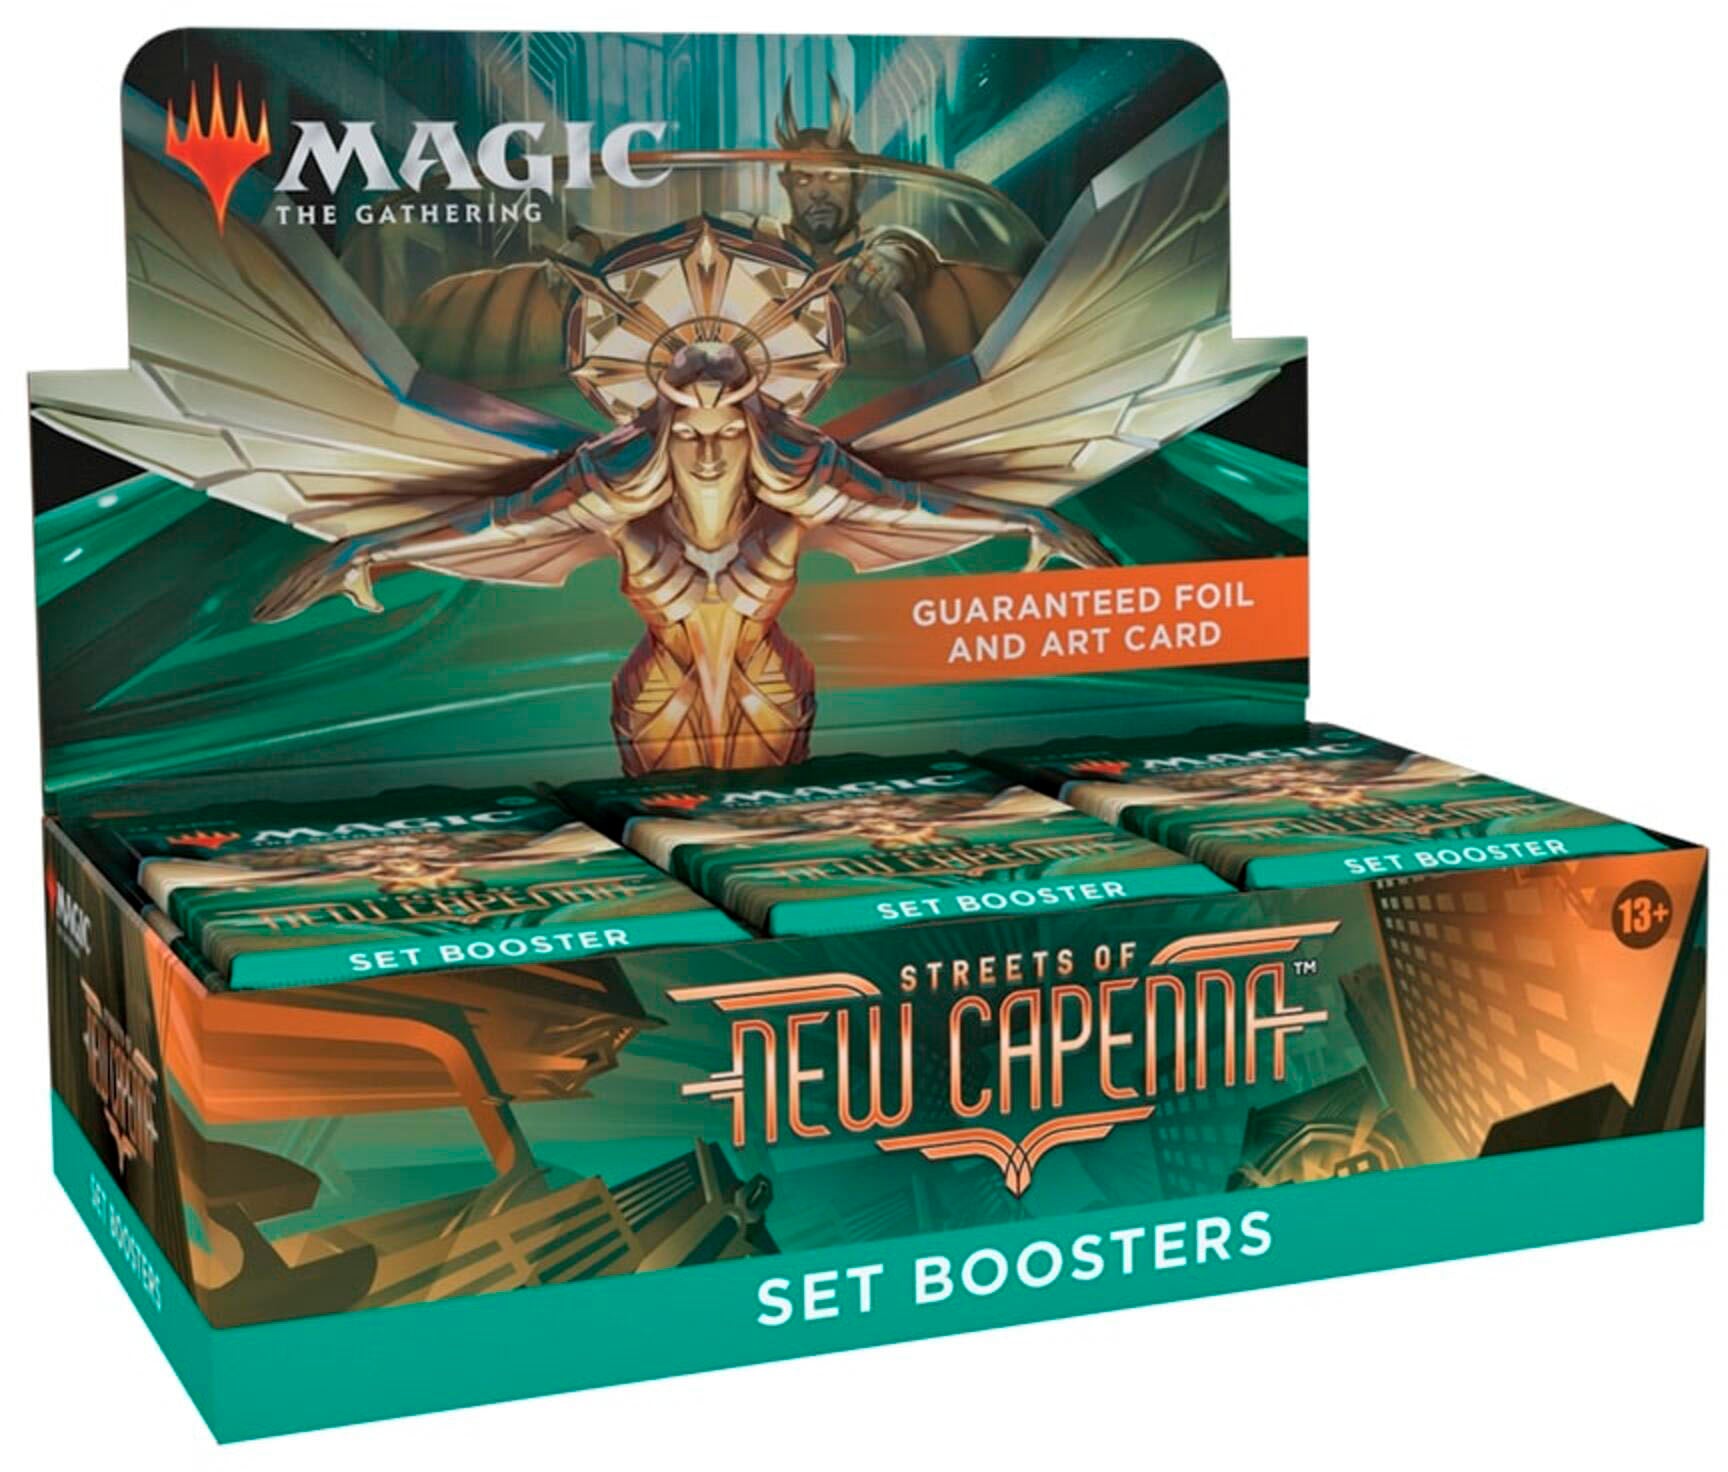 Magic the Gathering: Streets of New Capenna Set Booster Box | D20 Games